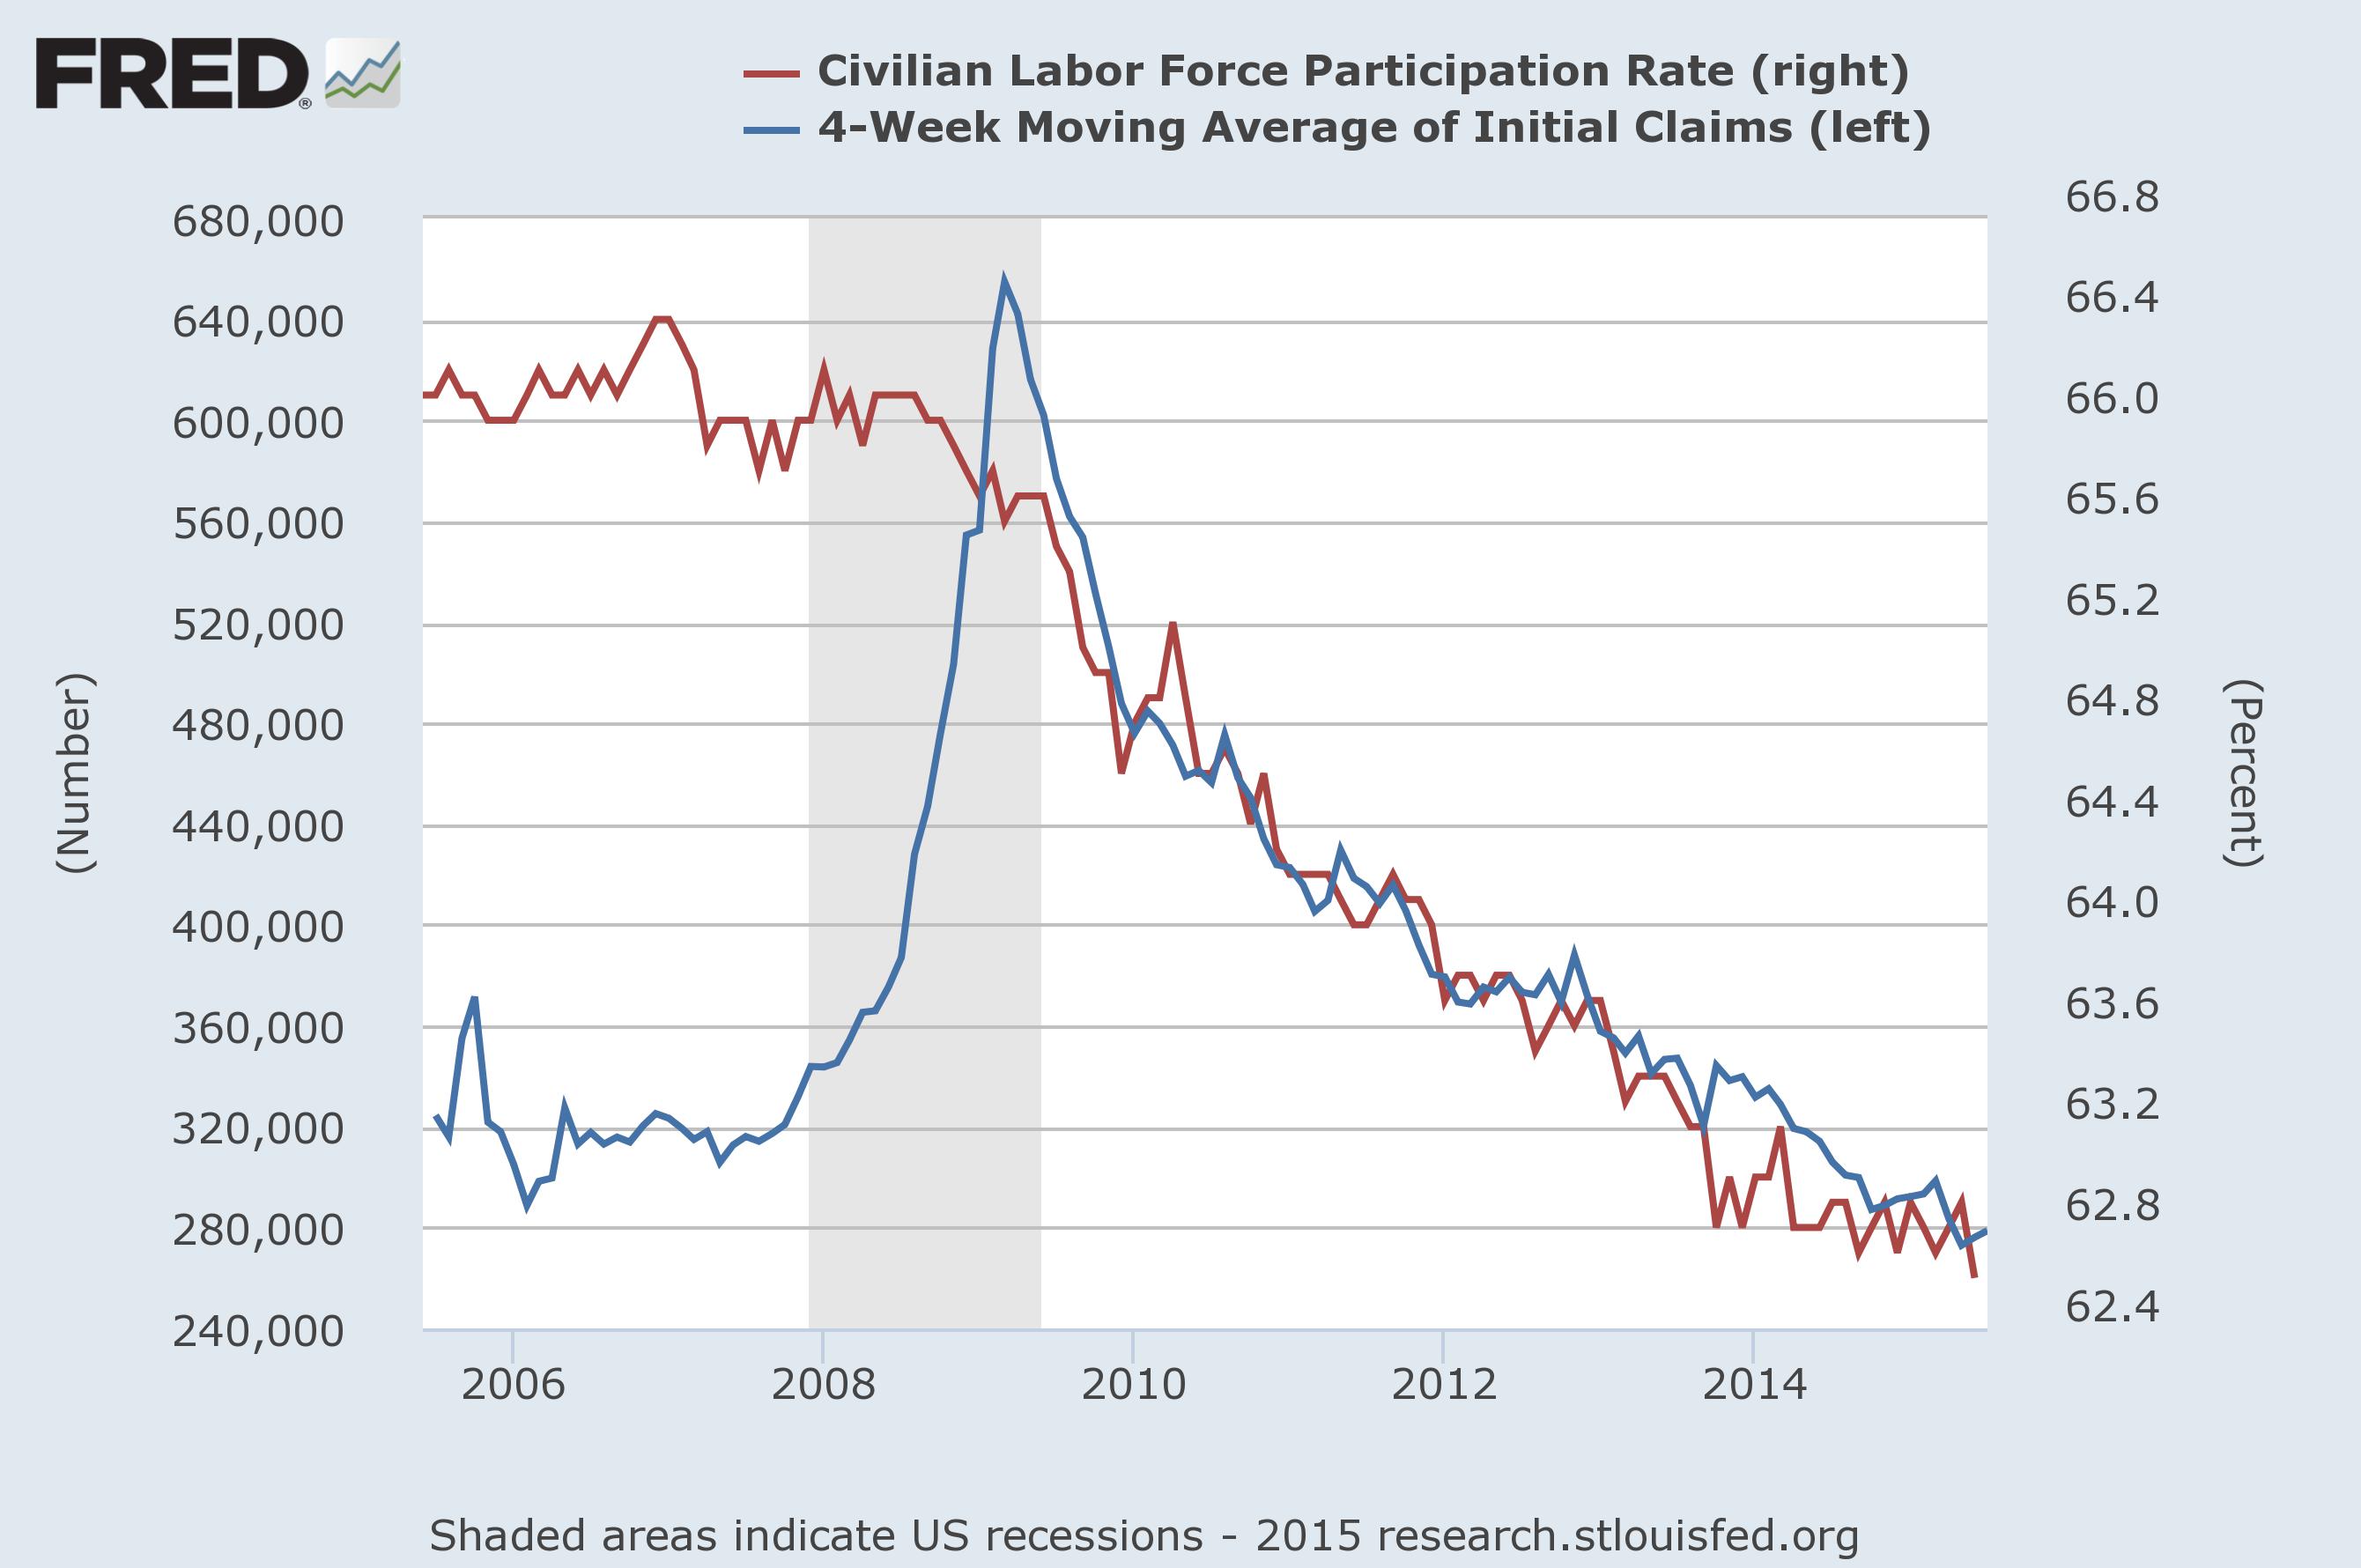 Initial Claims Participation Rate